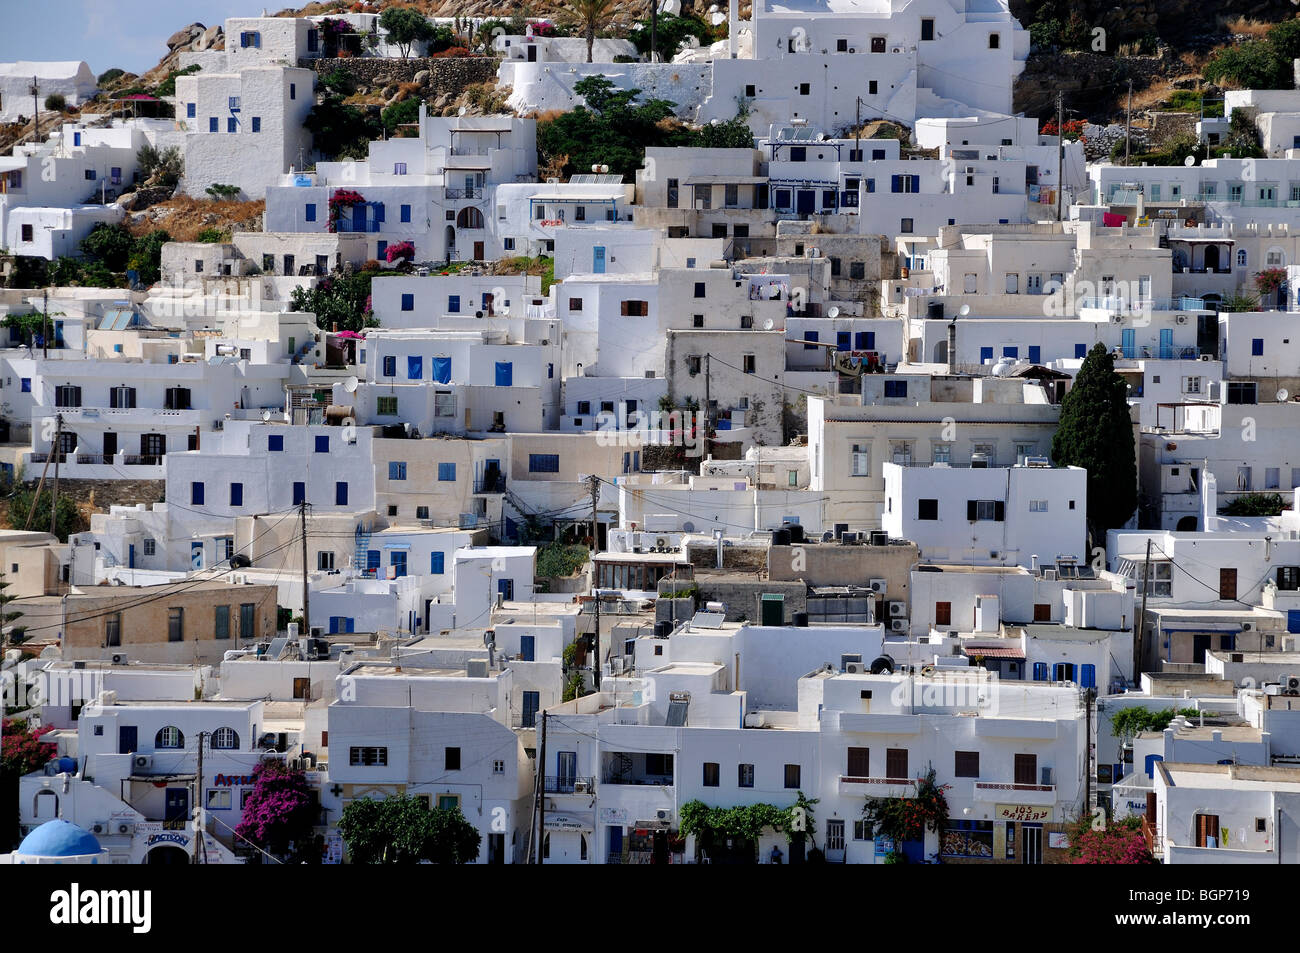 Chora (main town) under late afternoon light, Ios island, Greece Stock Photo